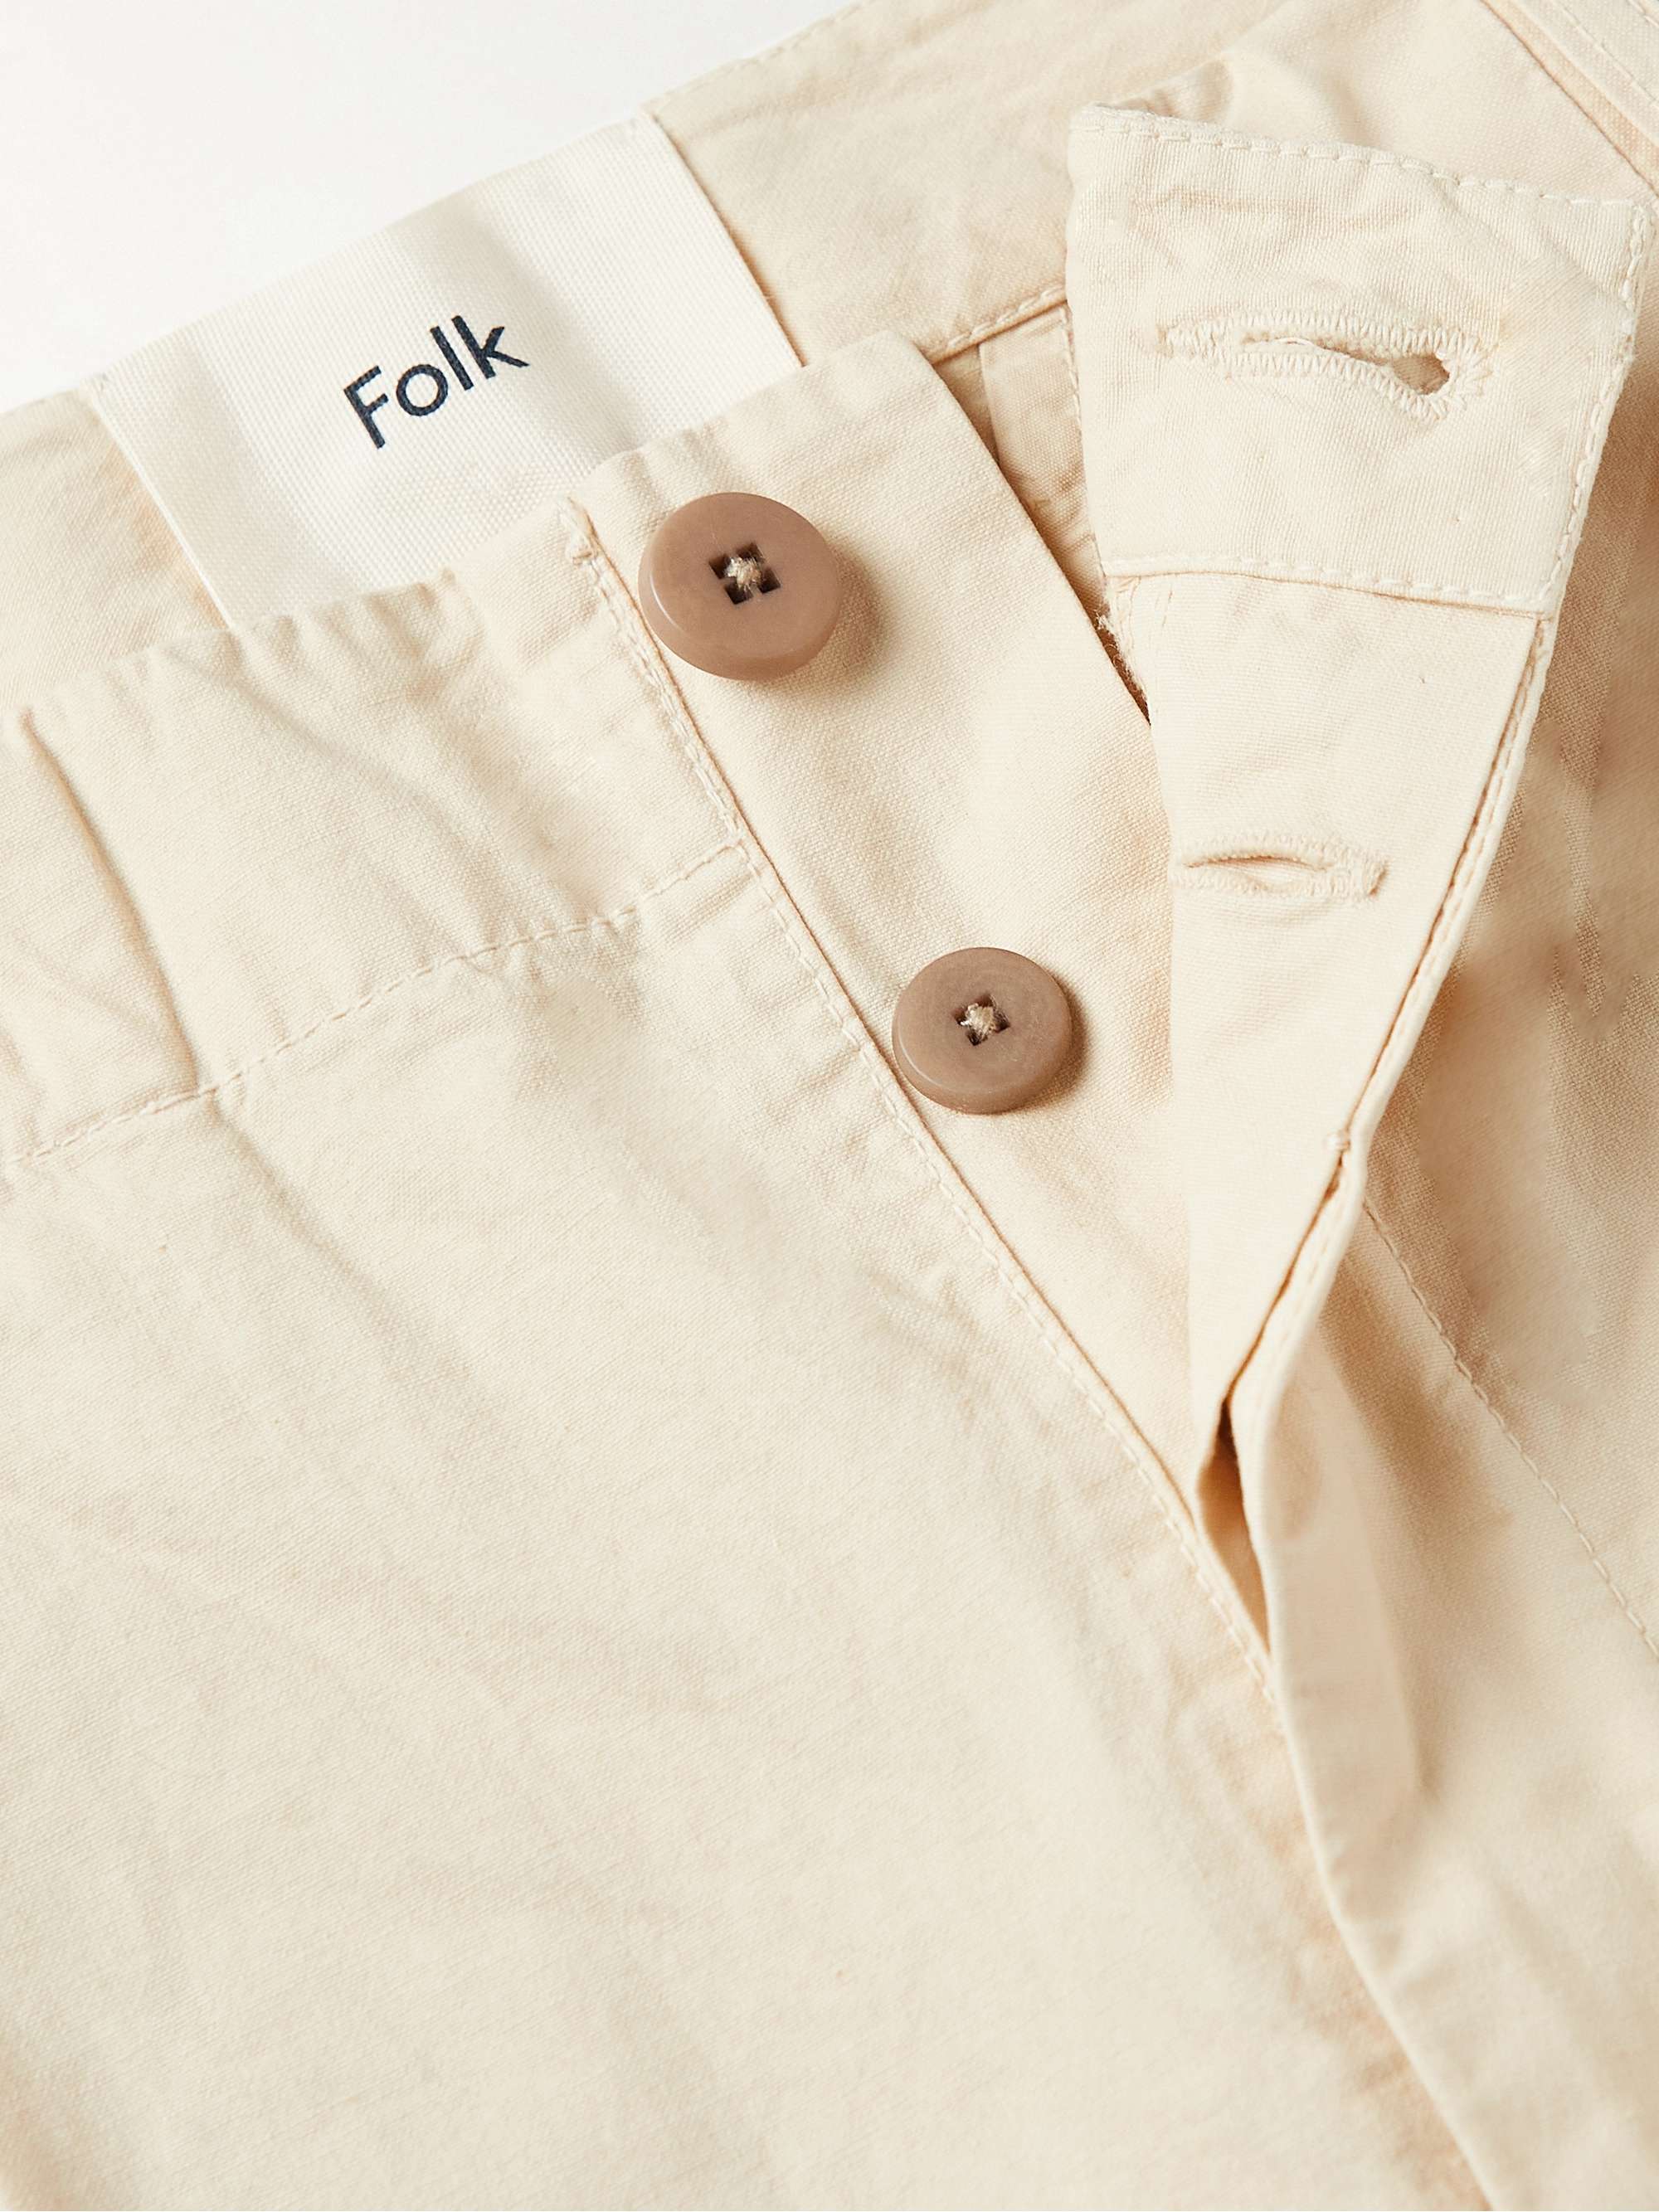 FOLK + Damien Poulain Assembly Tapered Crinkled-Cotton Trousers